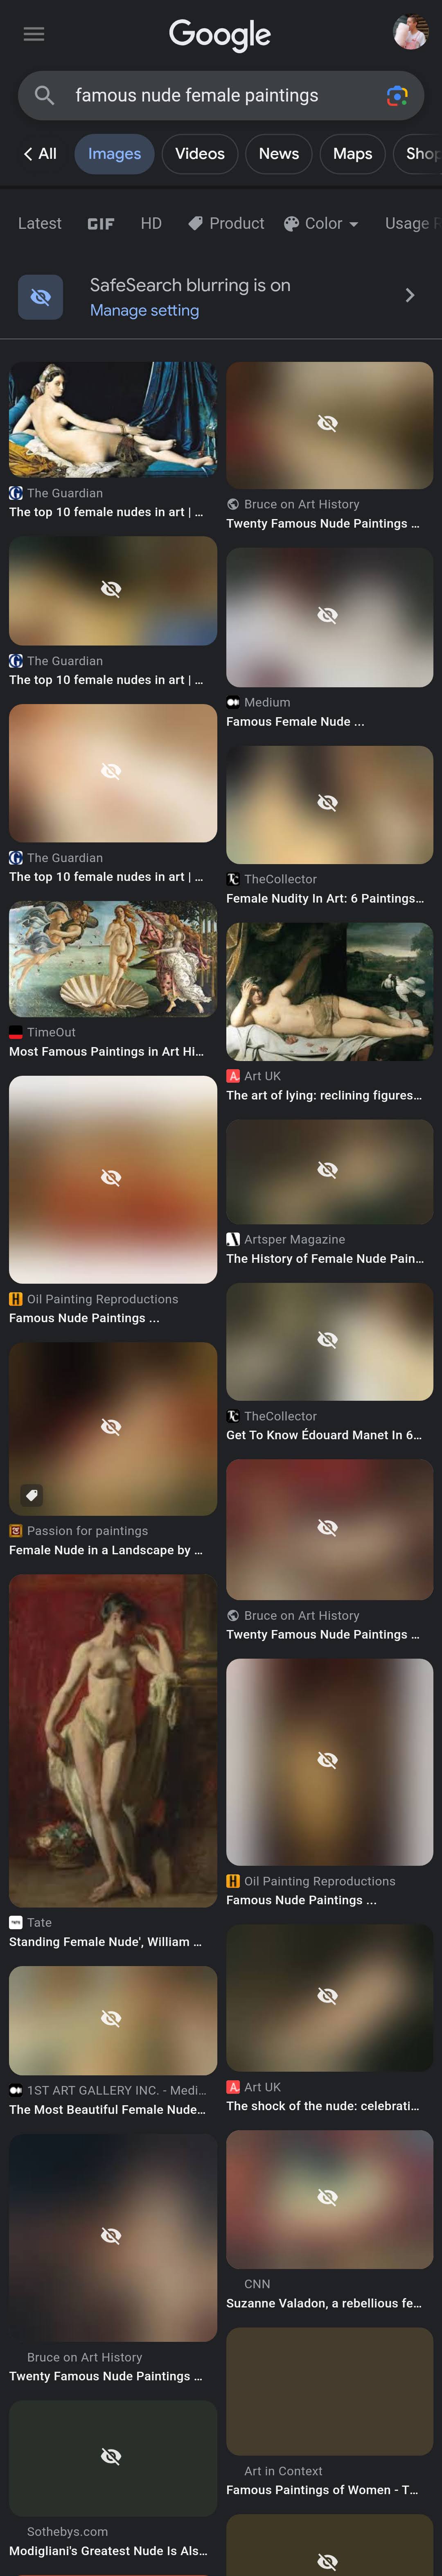 Screenshot of the Google Image search results for 'Famous nude female paintings' taken on a Pixel phone, showing around 4/5ths of the returned images are blurred beyond recognition